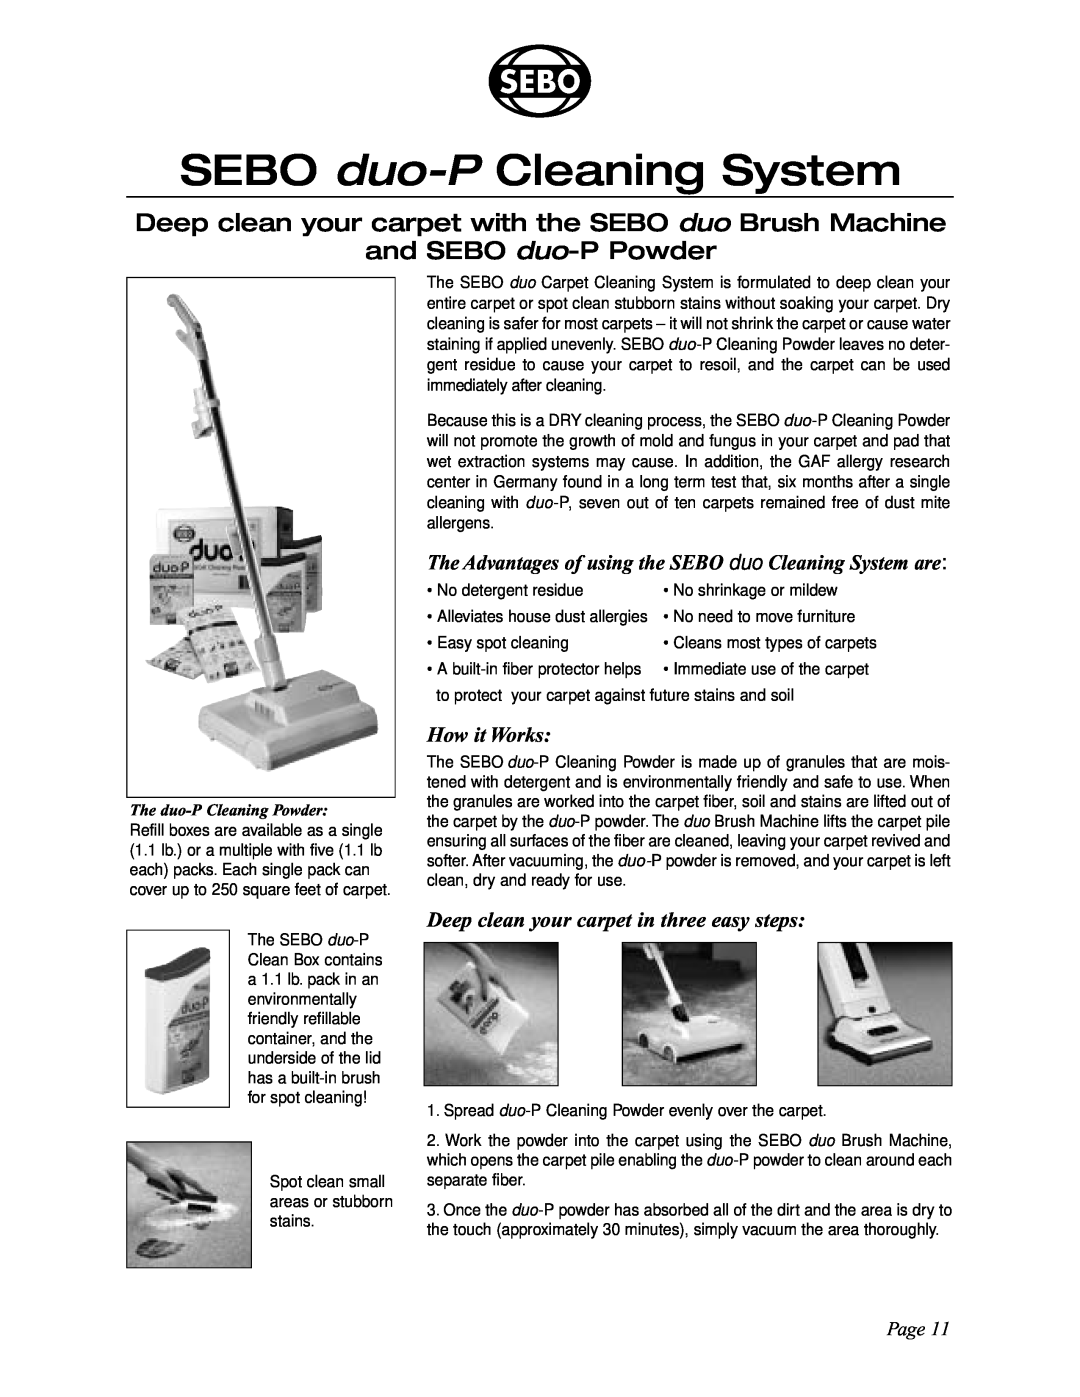 Sebo ET-H SEBO duo-P Cleaning System, Deep clean your carpet with the SEBO duo Brush Machine, and SEBO duo-P Powder, Page 